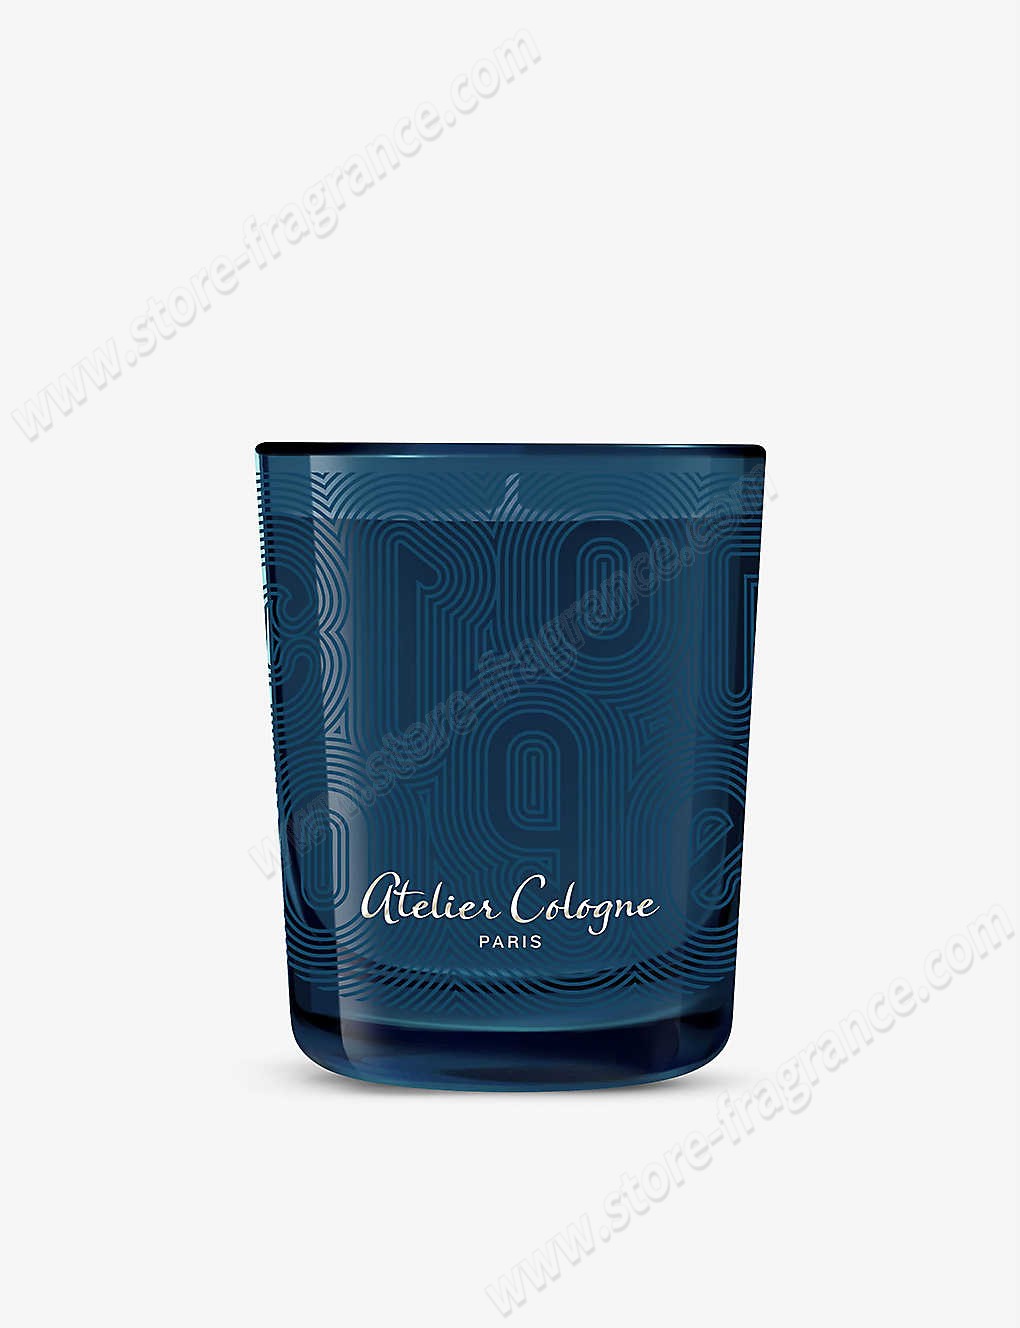 ATELIER COLOGNE/Rose London scented candle 180g ✿ Discount Store - ATELIER COLOGNE/Rose London scented candle 180g ✿ Discount Store